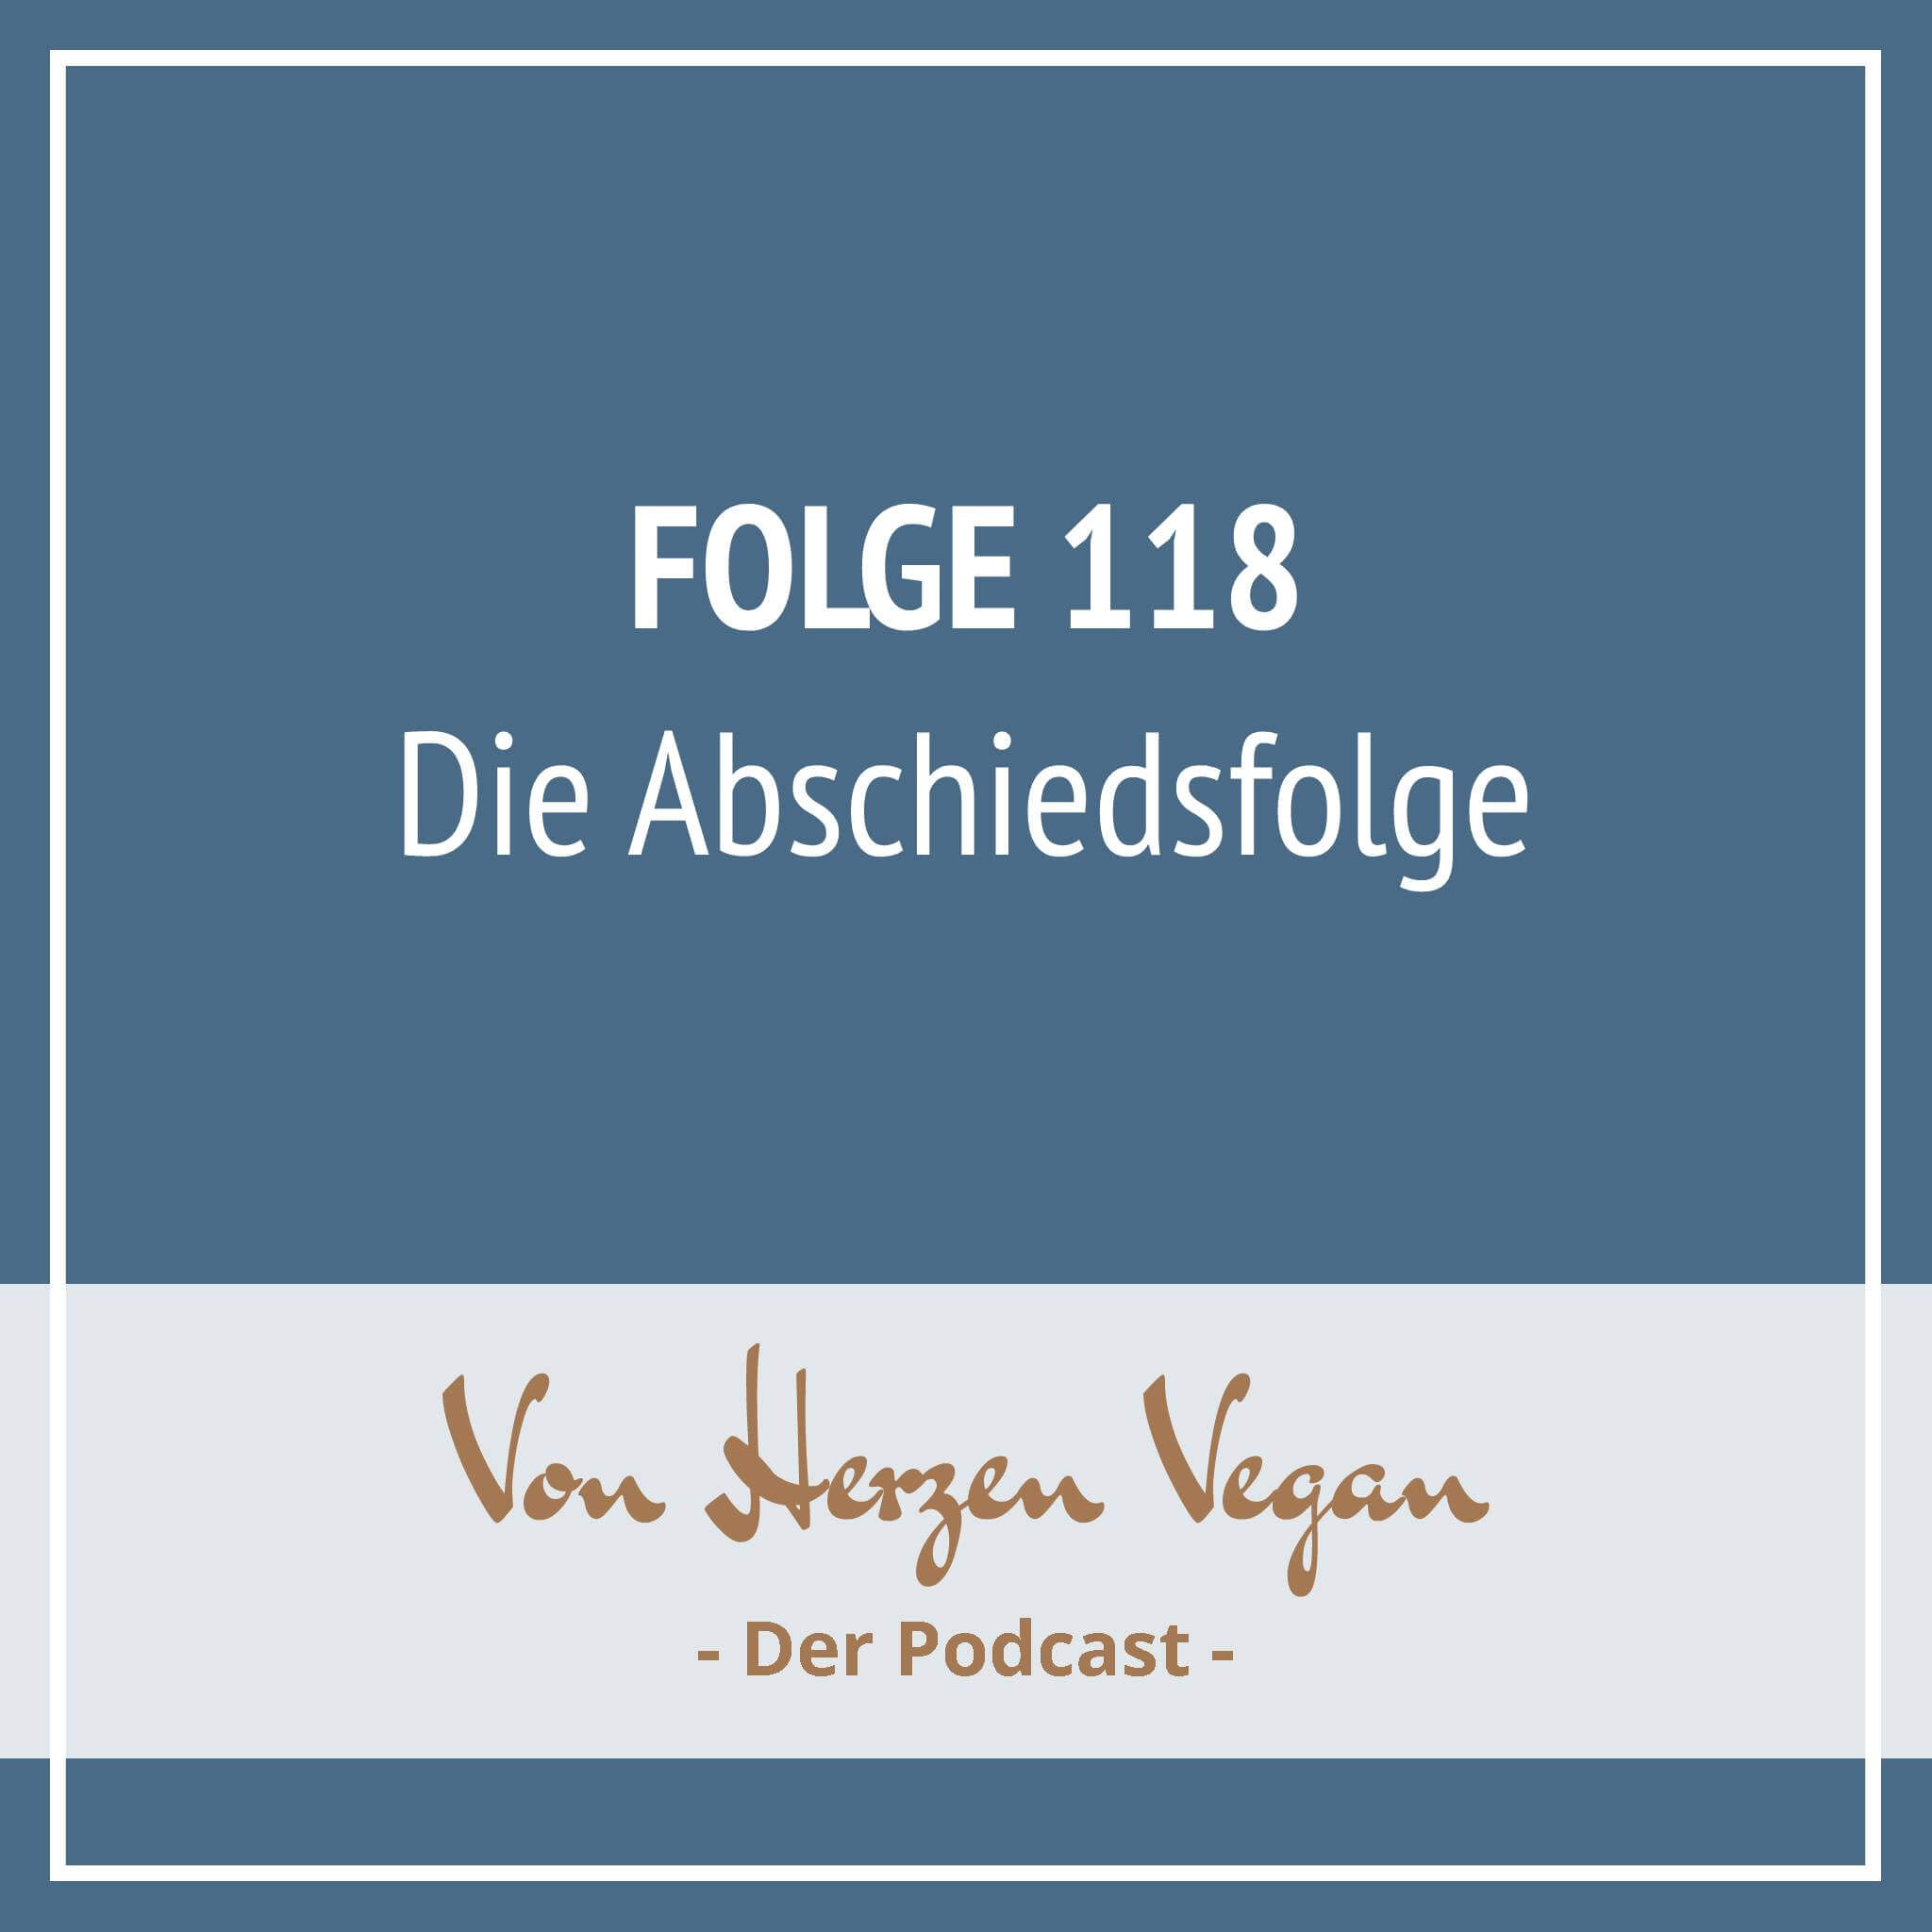 Folge 118 - Die Abschiedsfolge